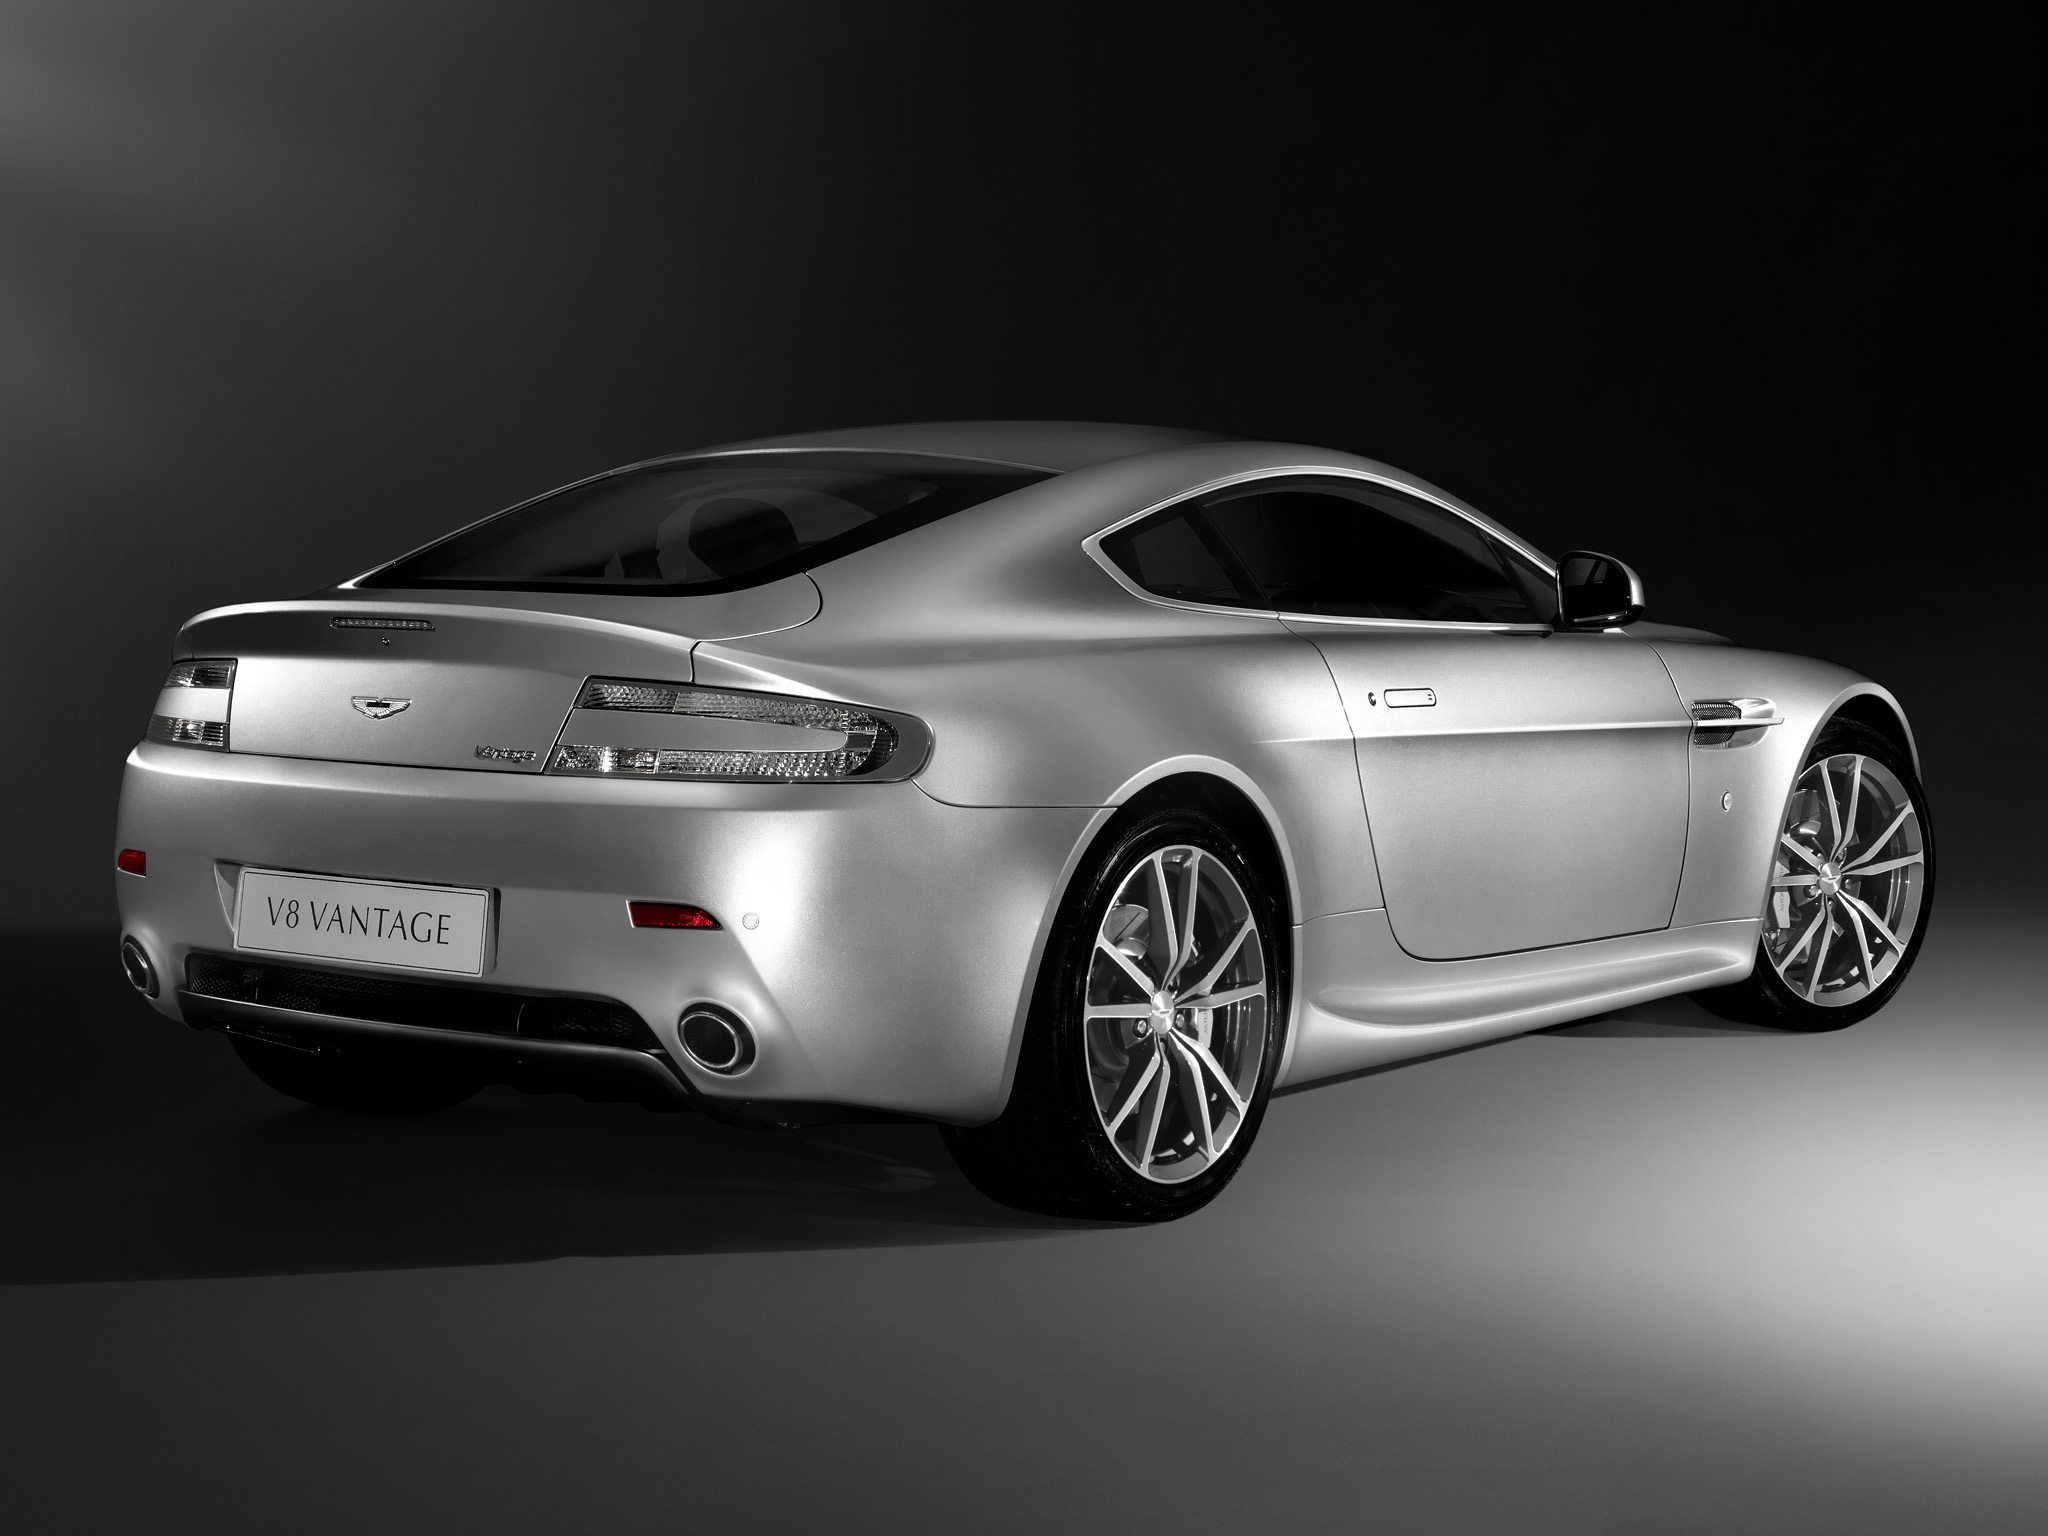 99161 download wallpaper auto, aston martin, cars, side view, style, 2008, silver, v8, vantage screensavers and pictures for free